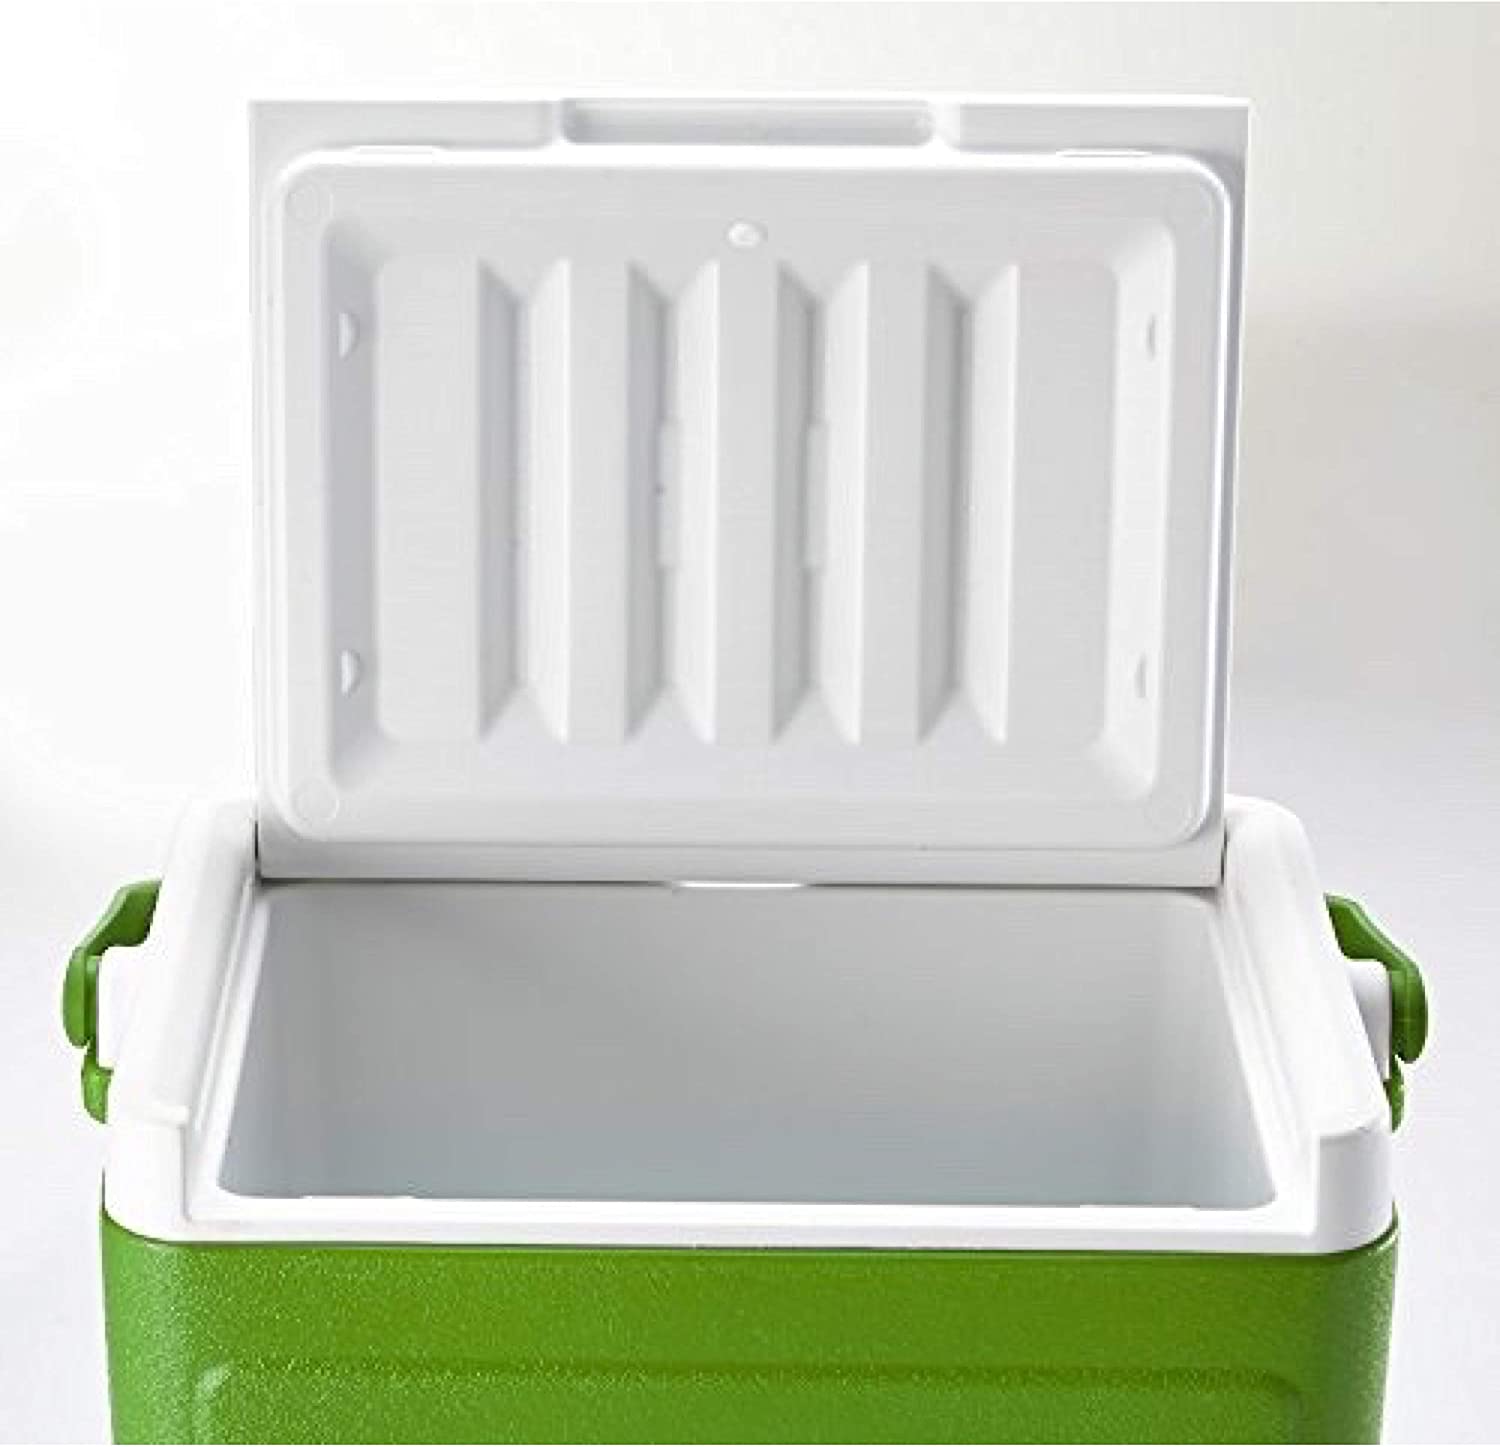 Coleman 18Qt 20-Can Party Stacker Cooler, Green - image 4 of 9